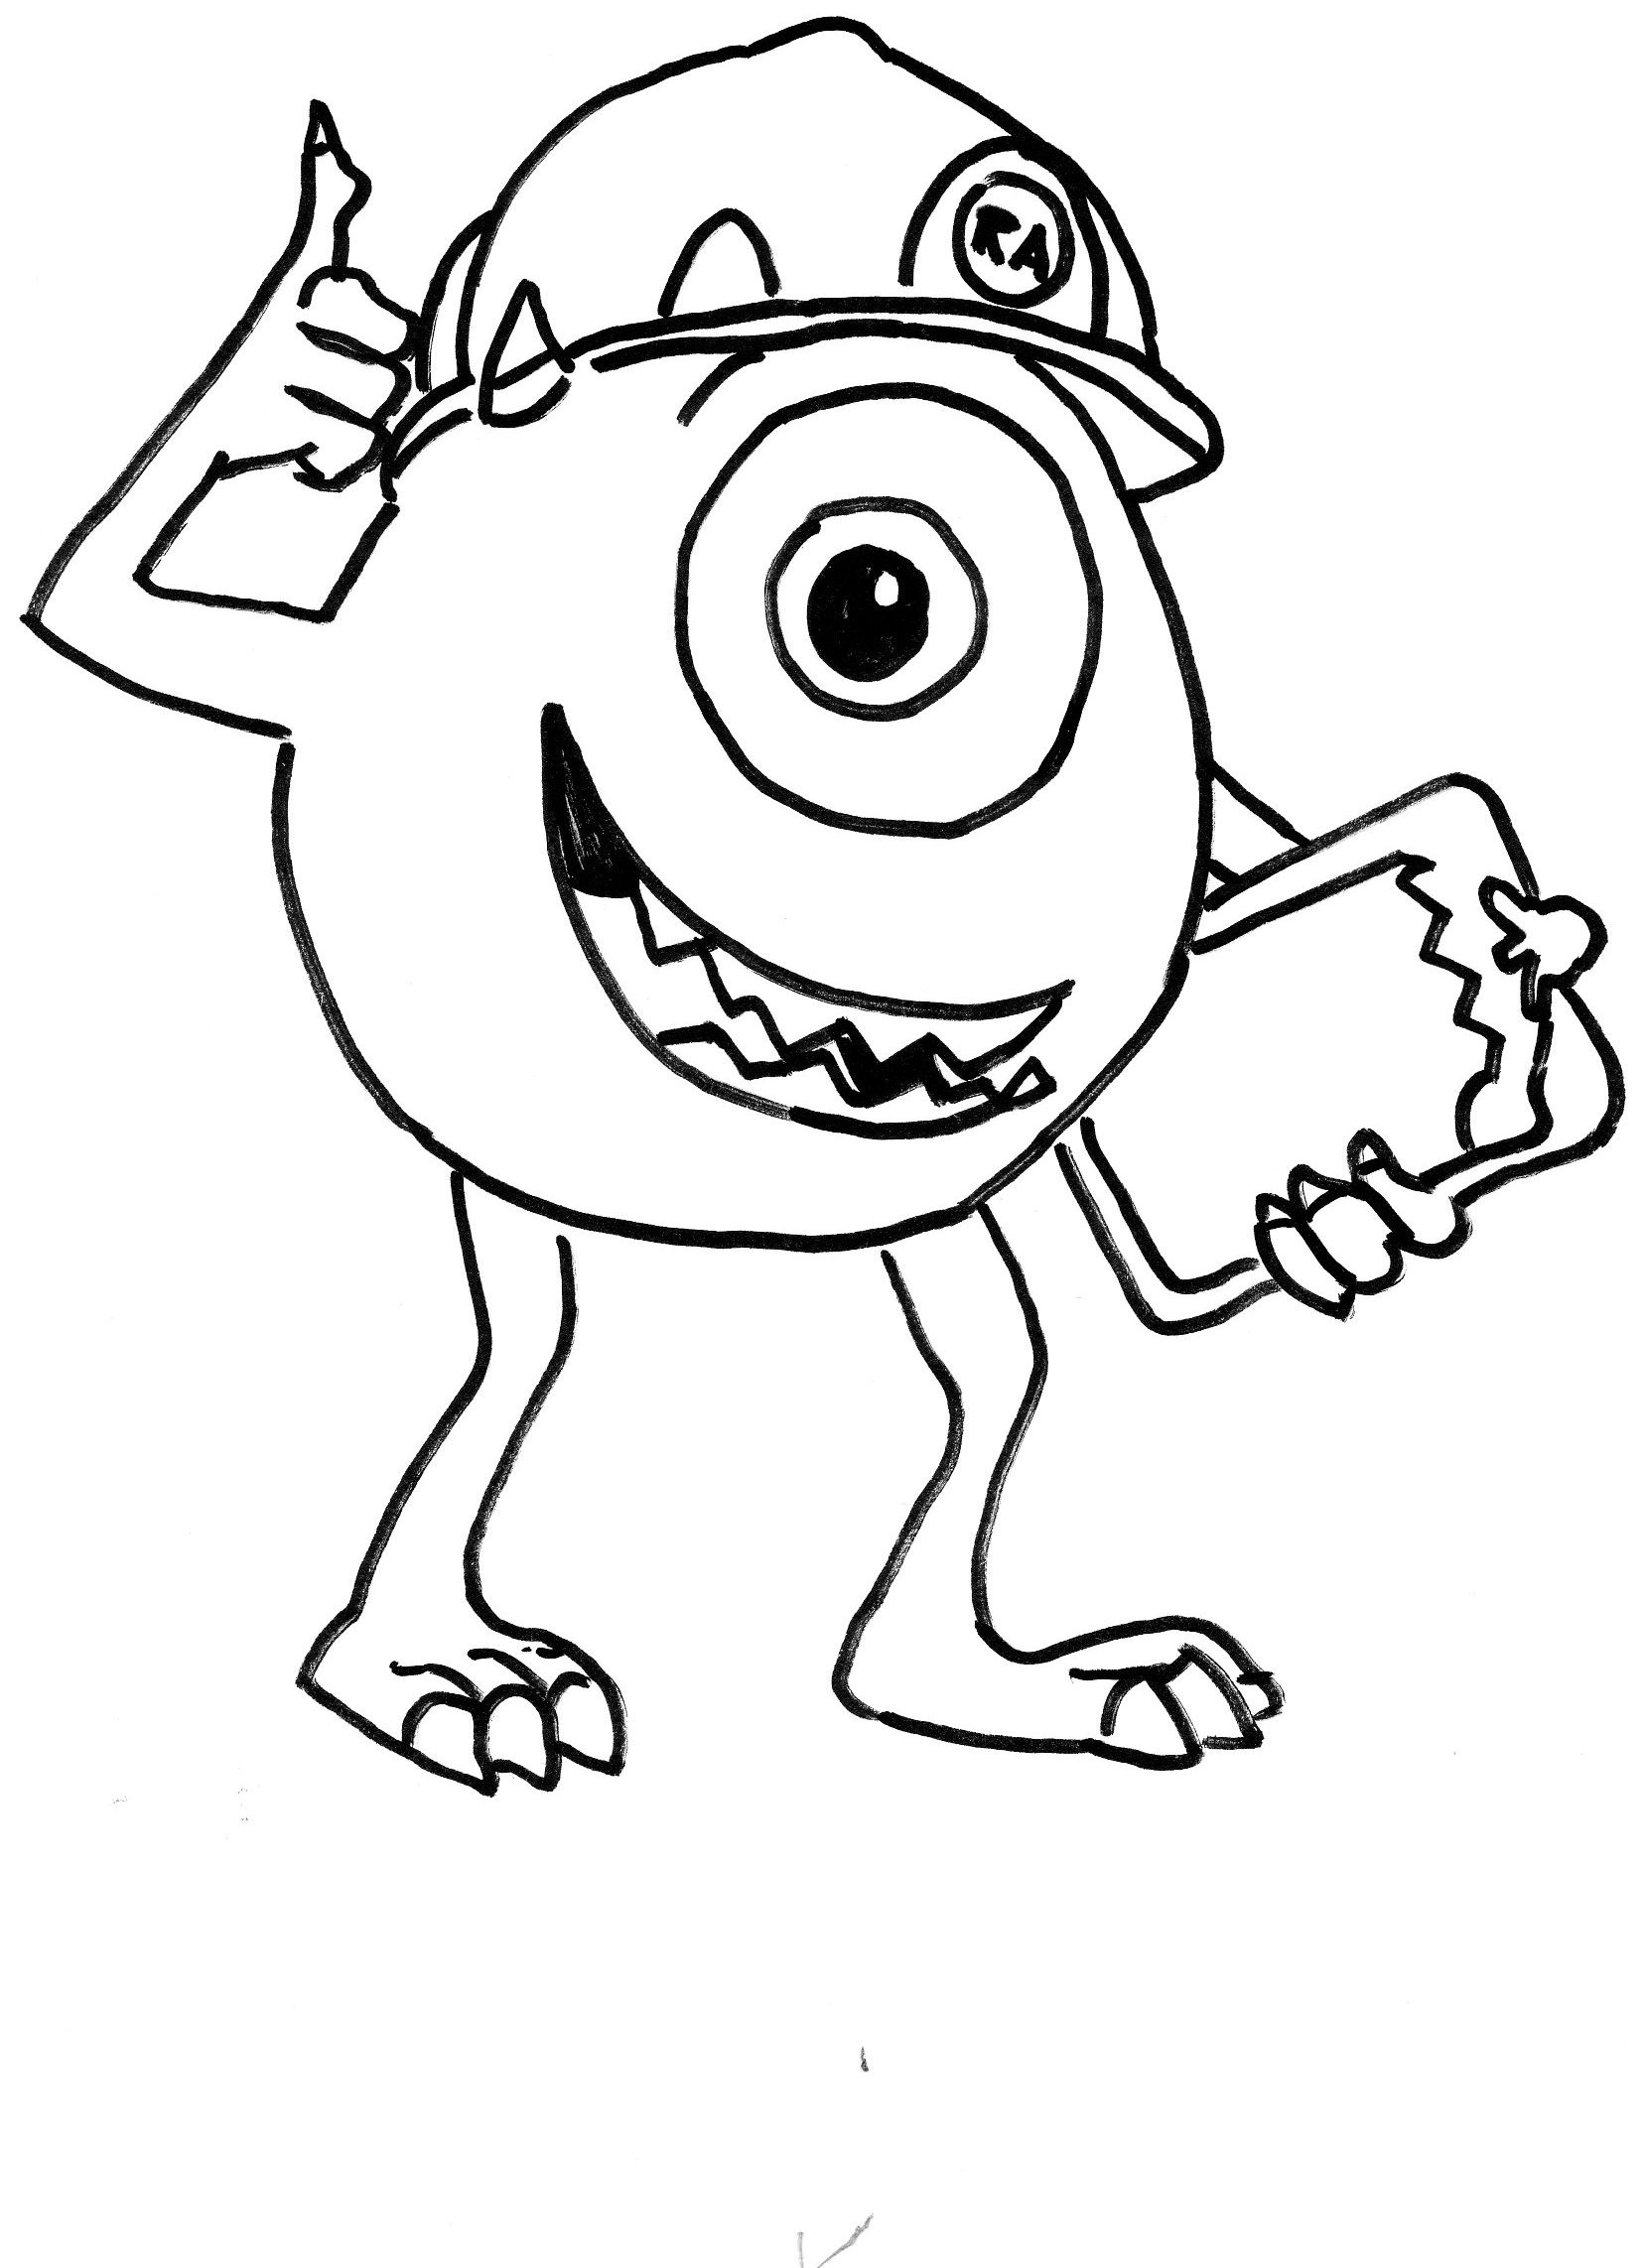 Free Print Coloring Pages For Boys
 Coloring Pages for Boys 2018 Dr Odd